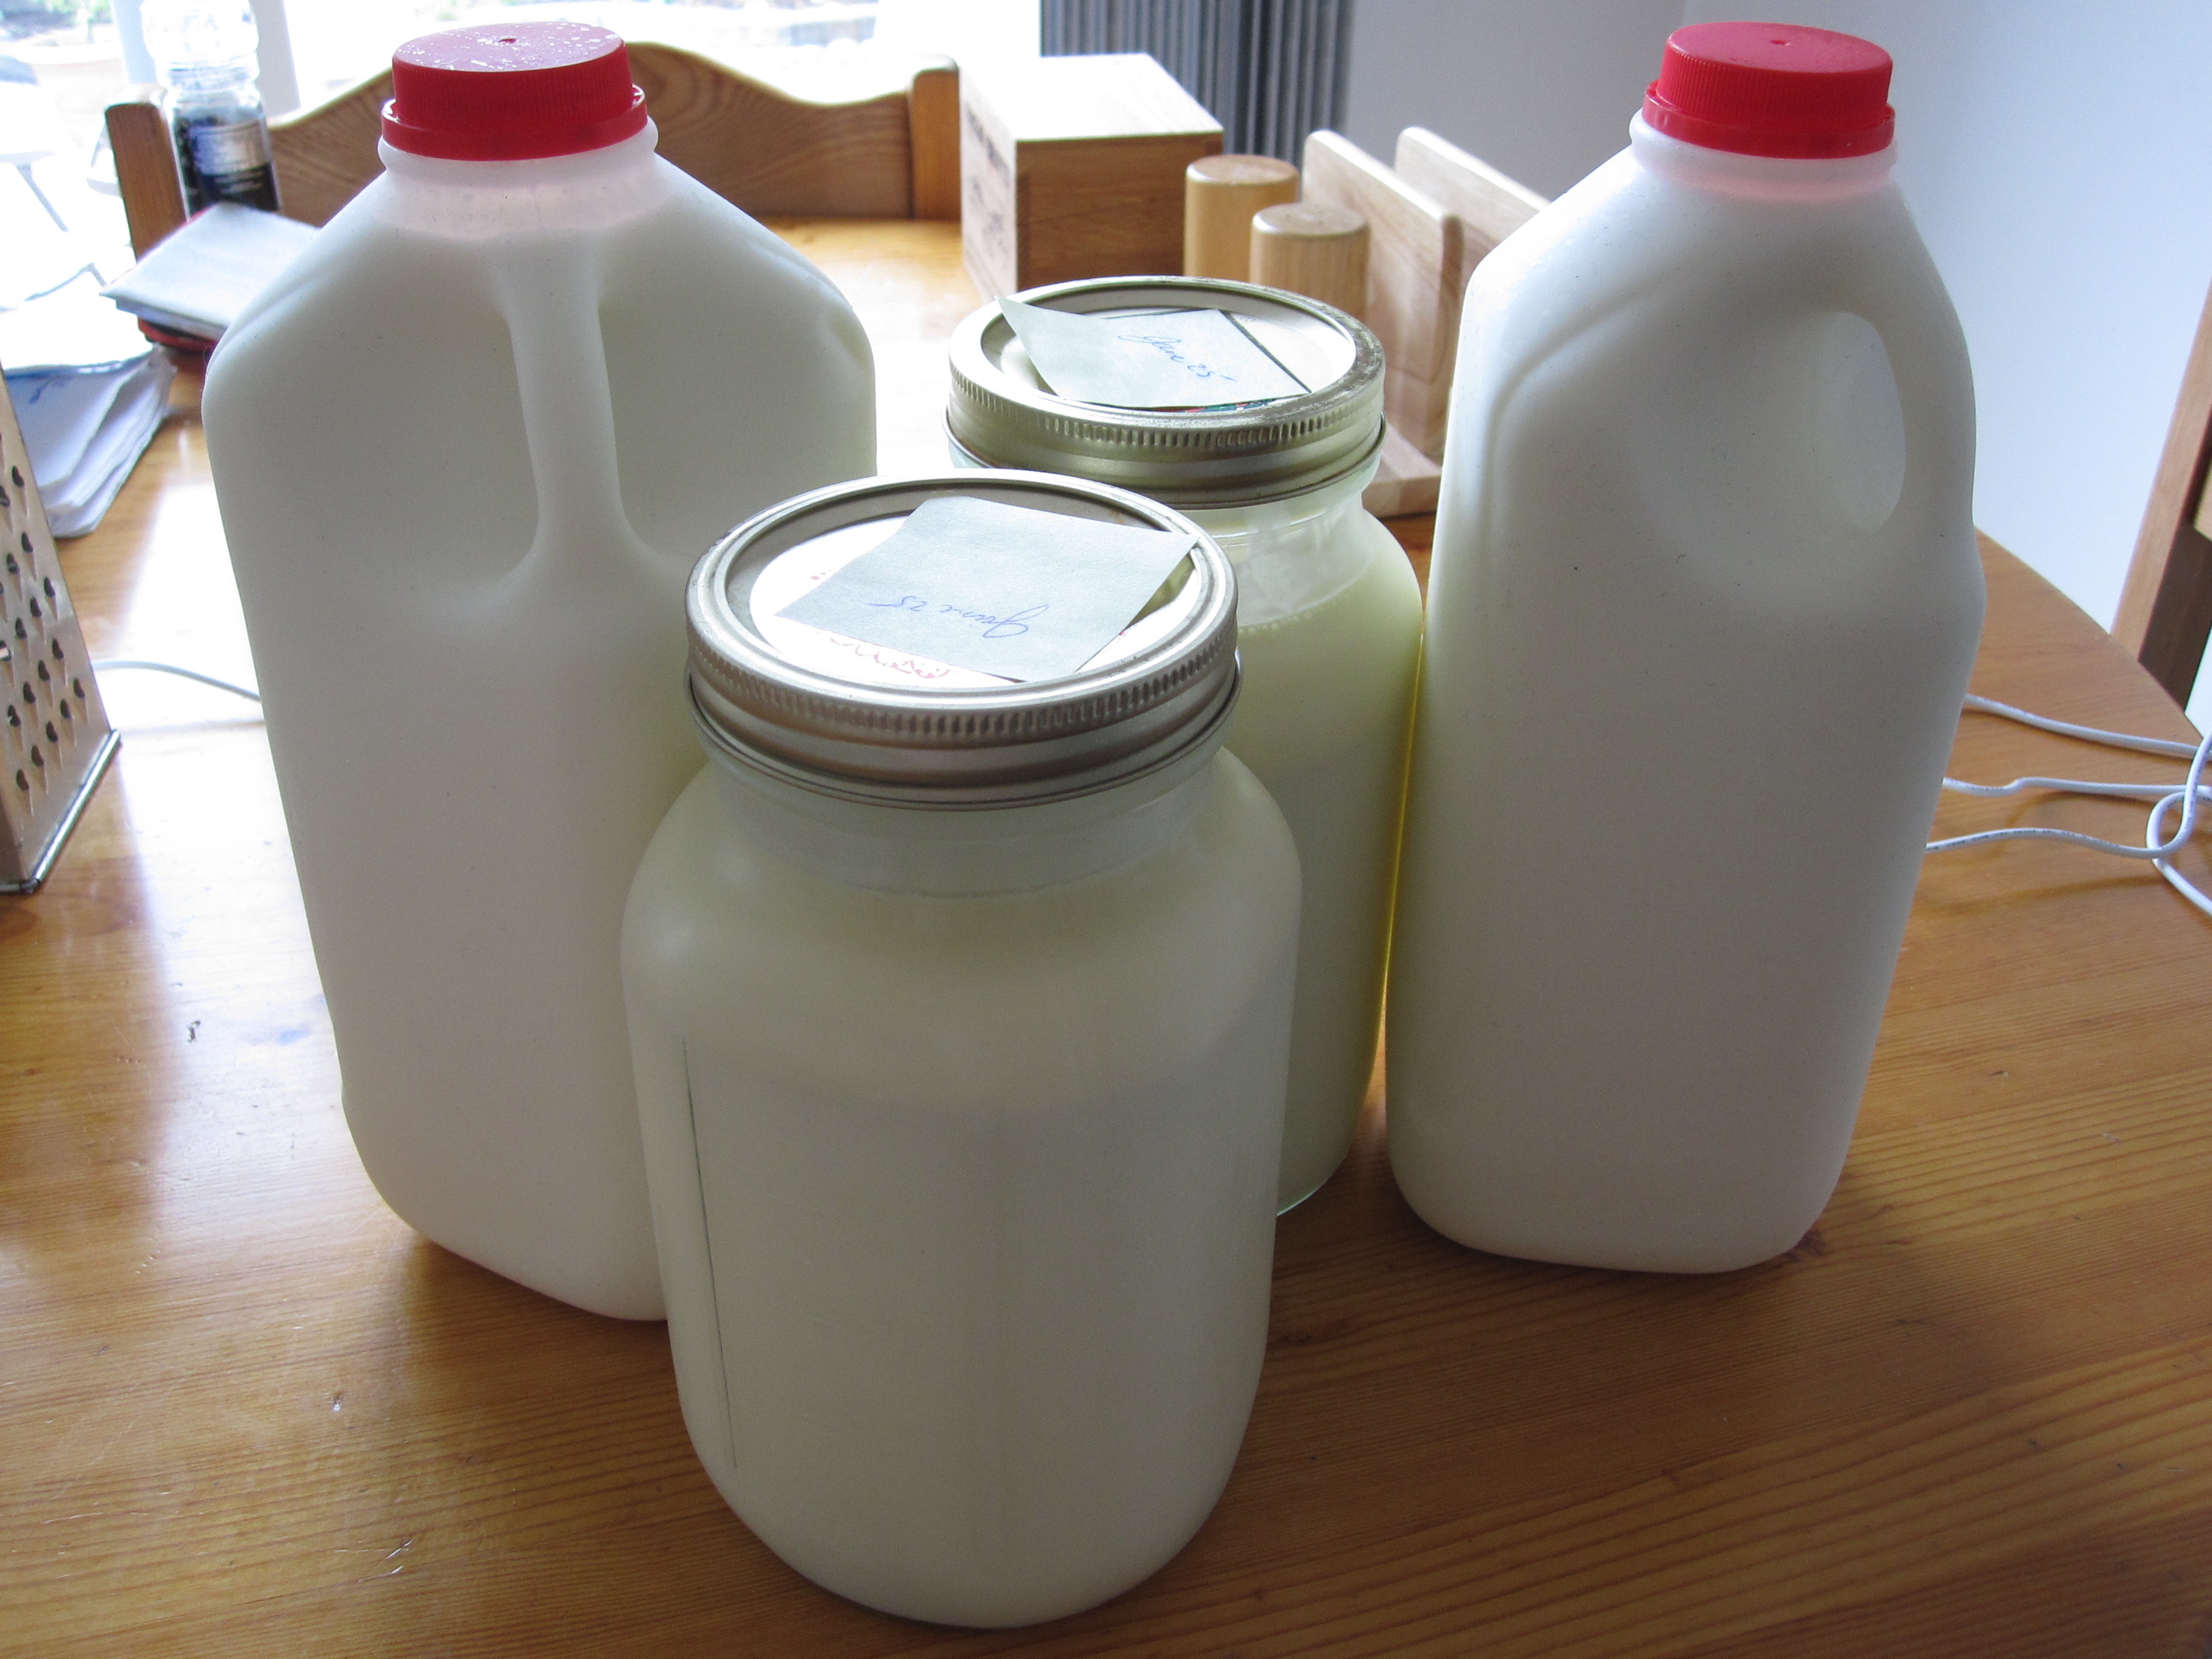 Profoundly Flawed Study Used as Basis for CDC’s New Report on Supposed “Dangers” of Raw Milk